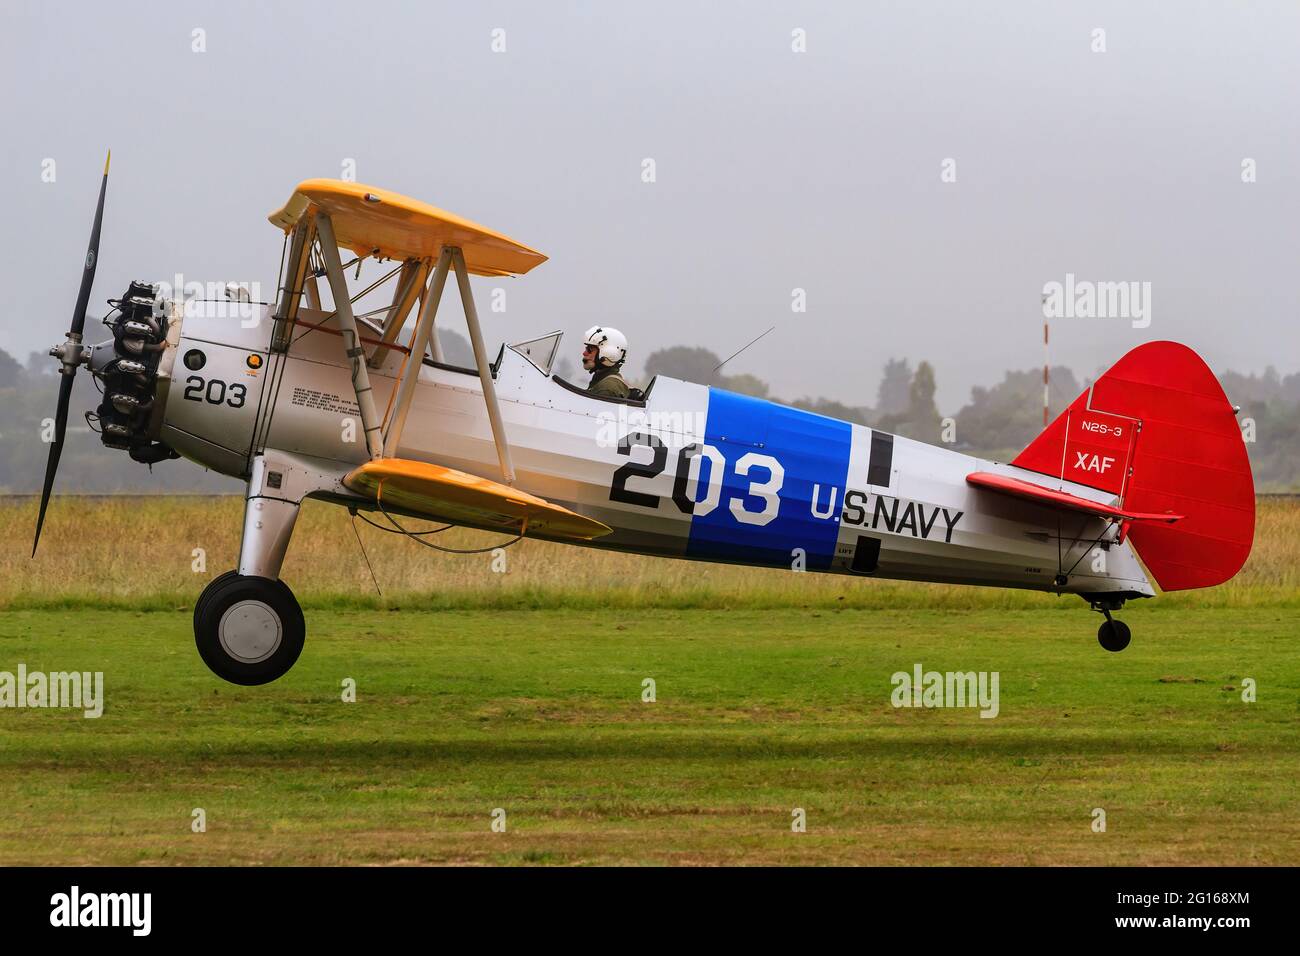 A 1930s Boeing Stearman Model 75 biplane in US Navy colors comes in for a landing Stock Photo